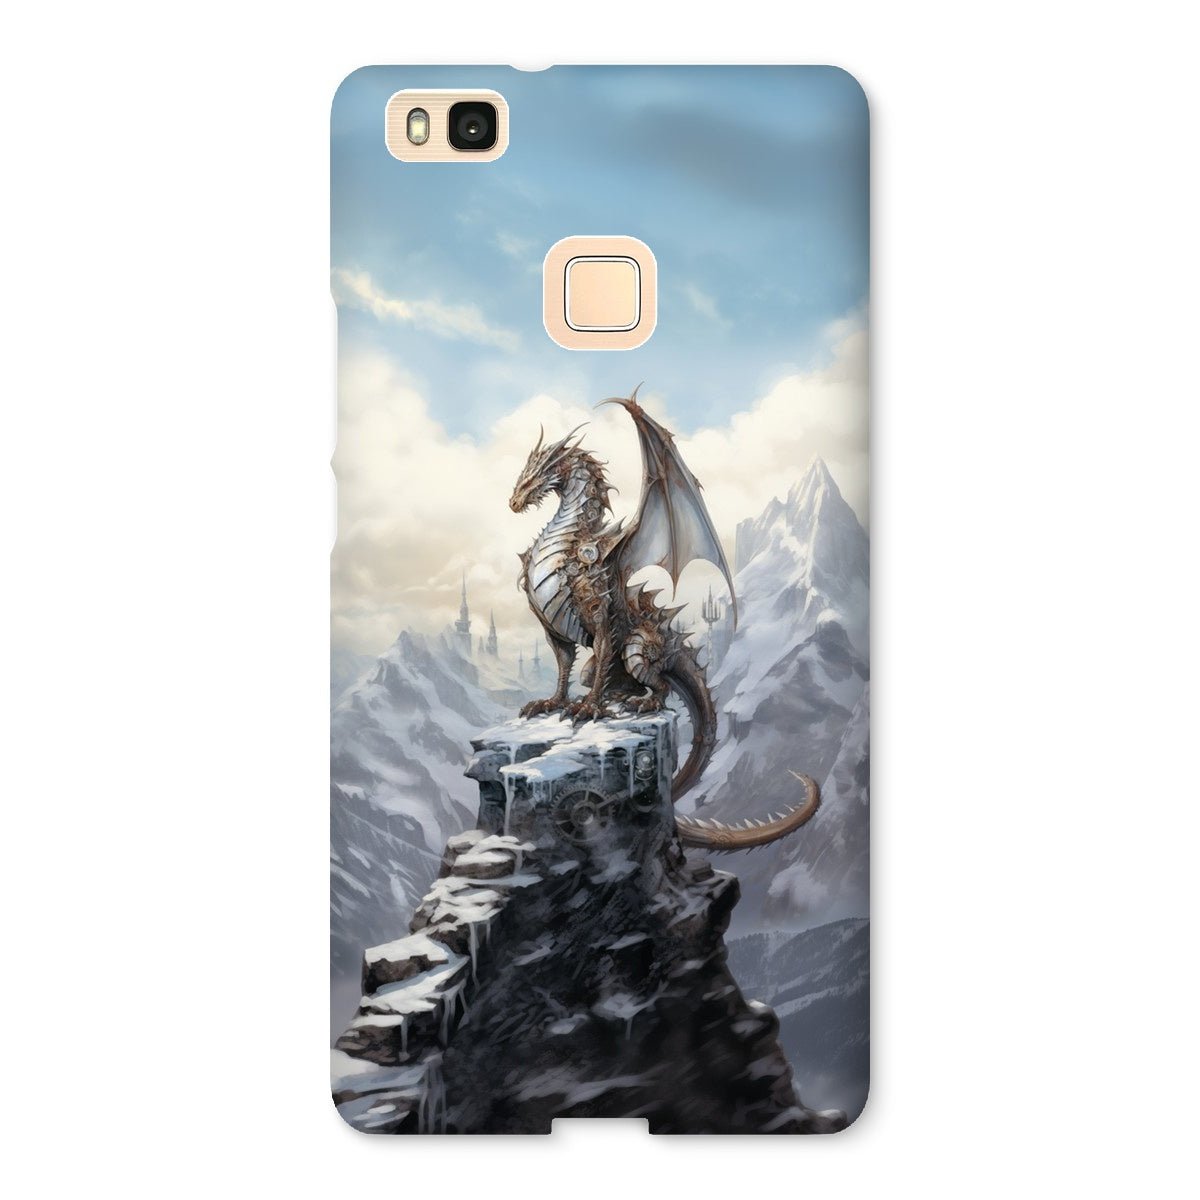 Dragon iPhone Snap Phone CasePhone & Tablet CasesGalactrip CoutureDragon iPhone Snap Phone Case